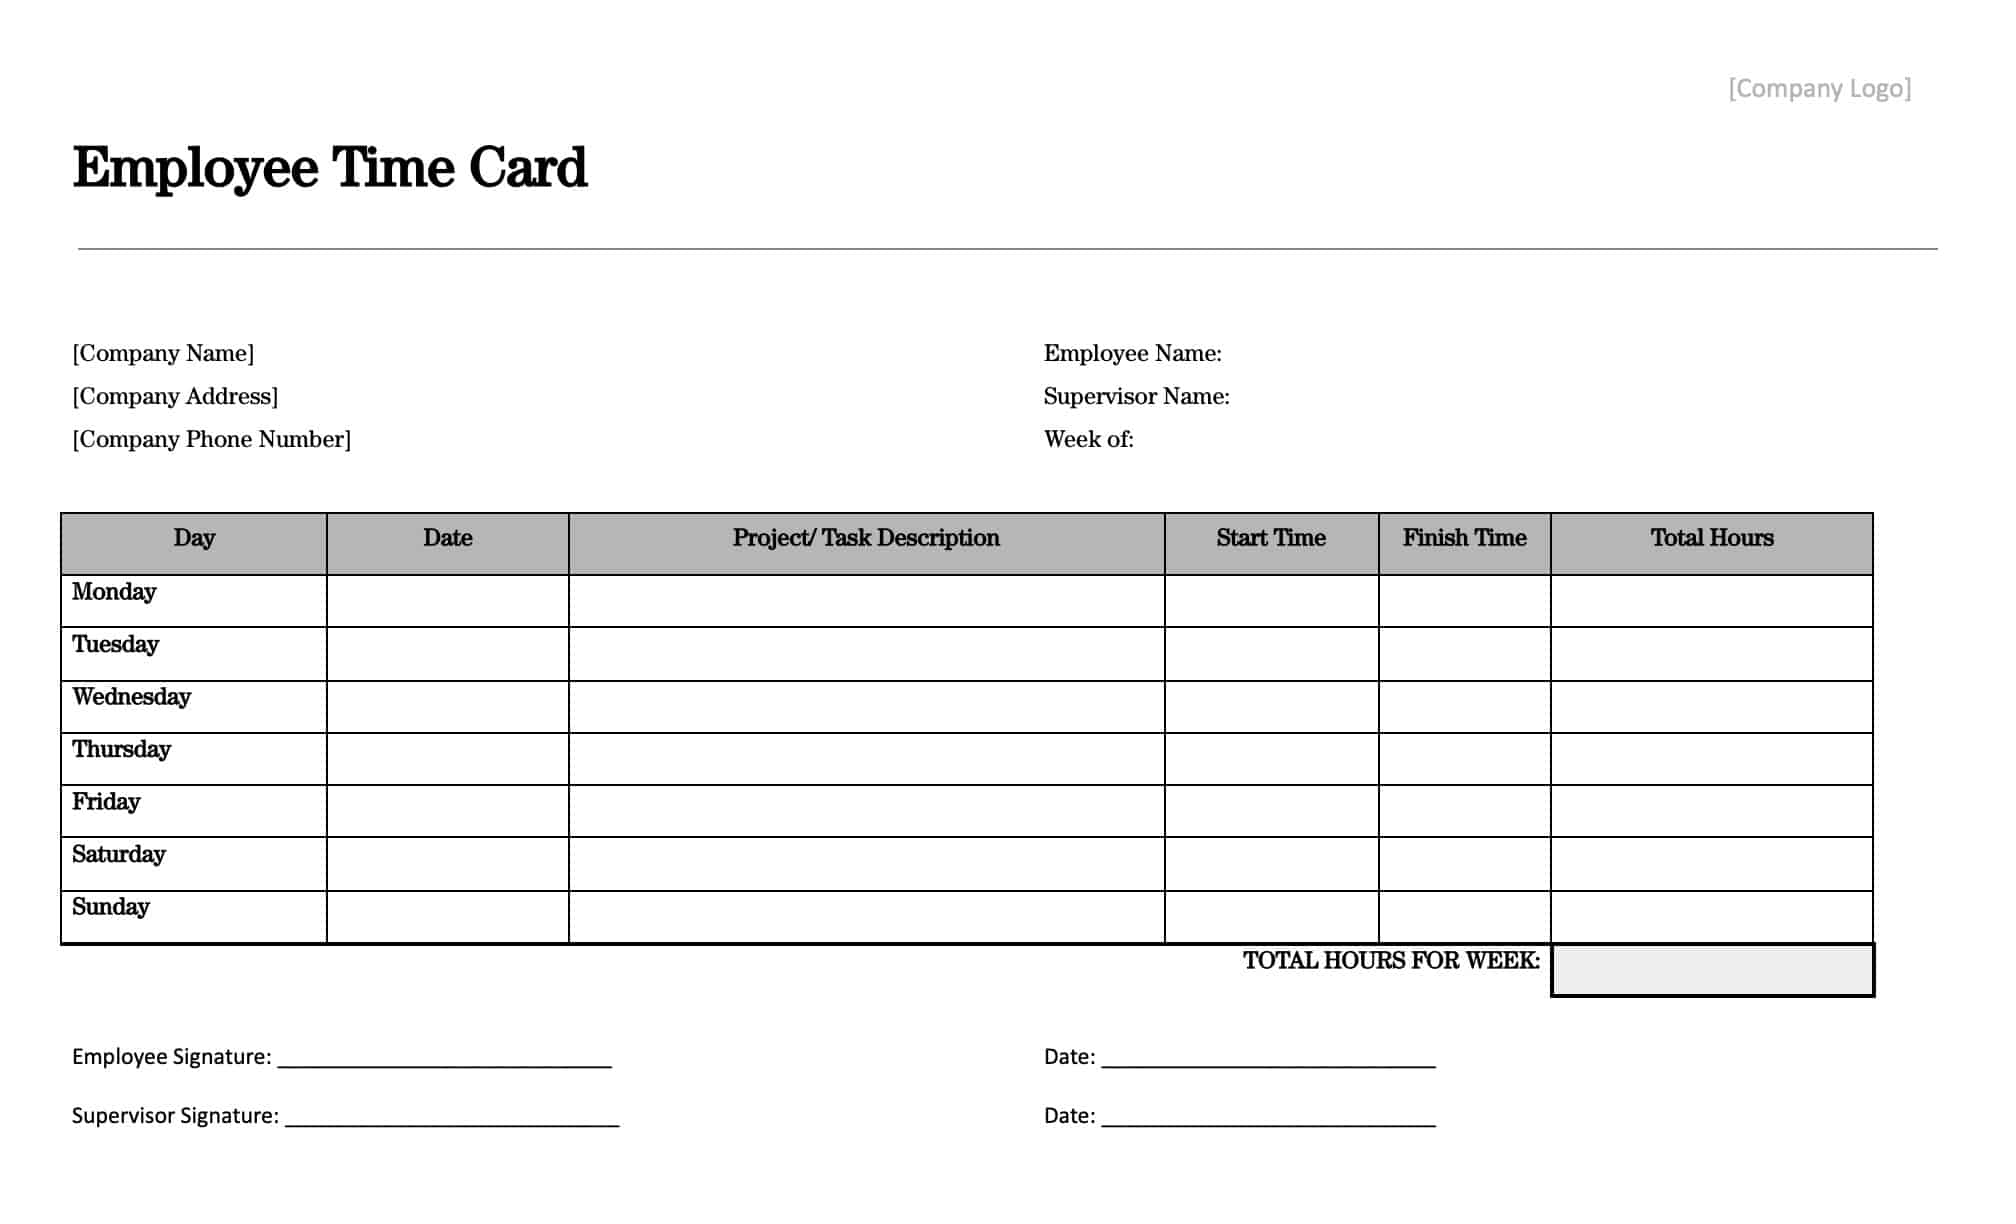 construction timesheet template excel